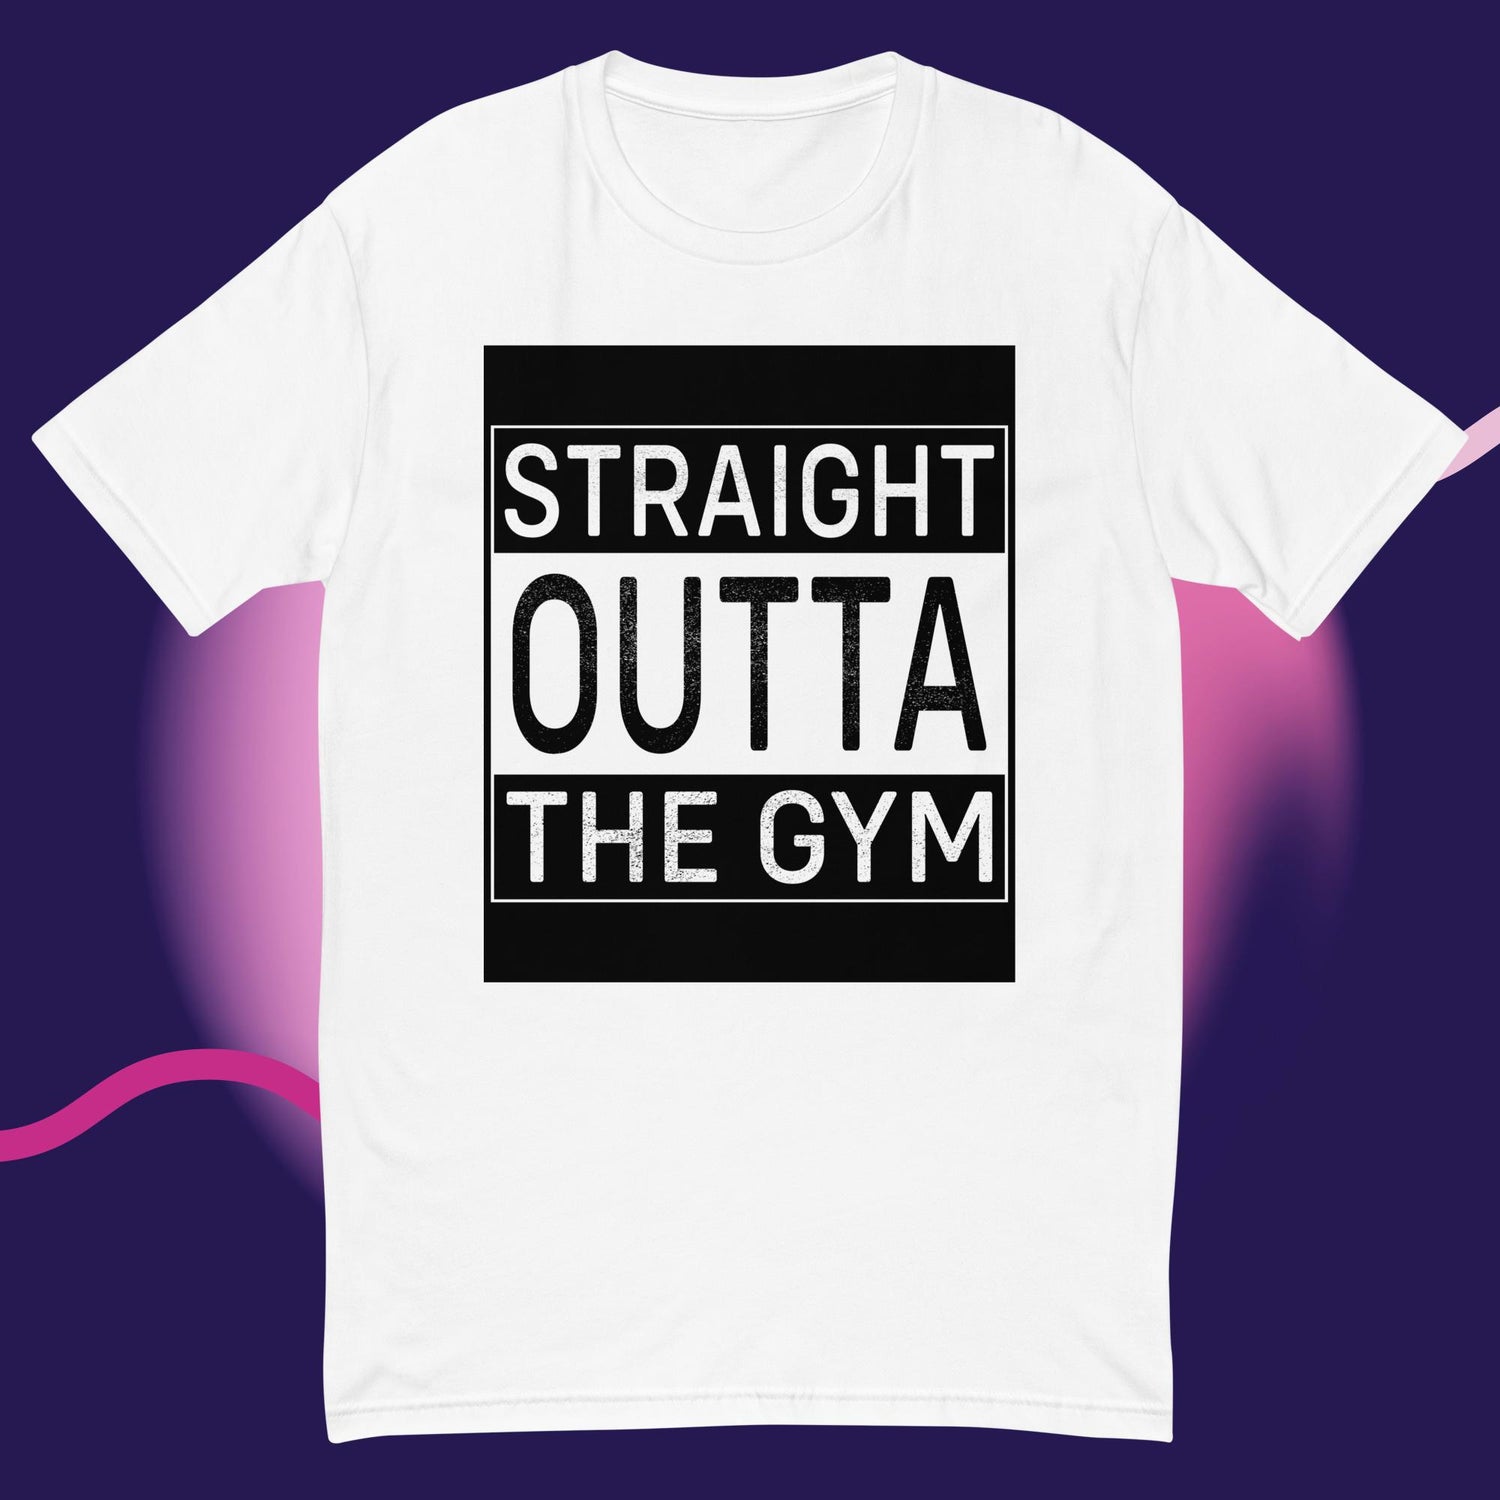 Sparkle-kiss-creations-straight-out-of-the-gym-t-shirt-white